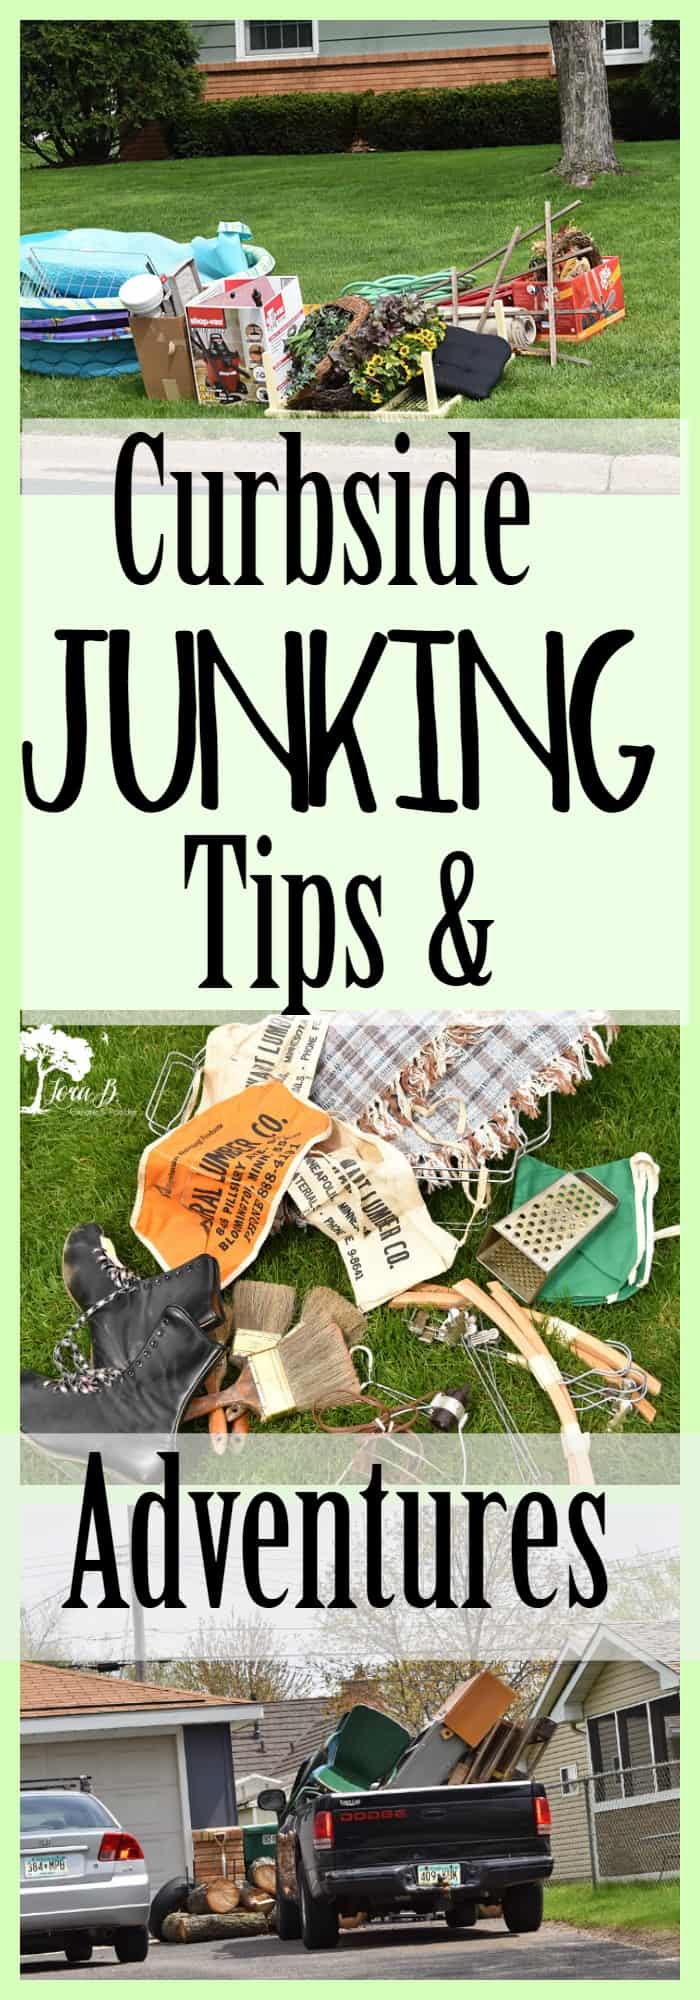 Curbside Junking Tips and Adventures